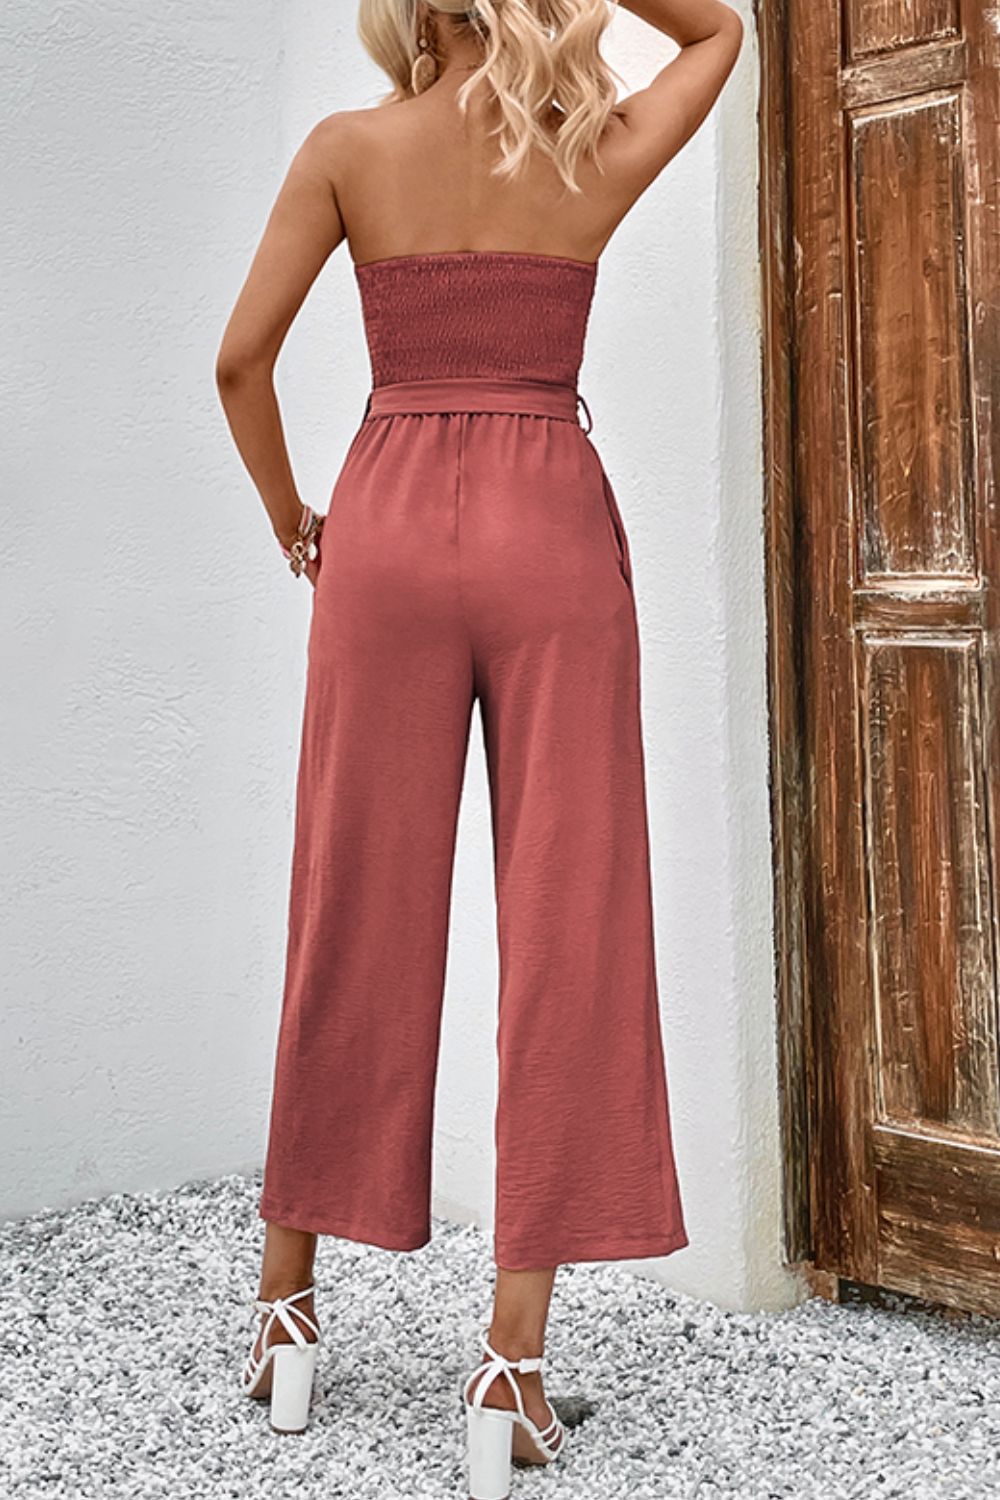 Decorative Button Strapless Smocked Jumpsuit with Pockets by Coco Charli